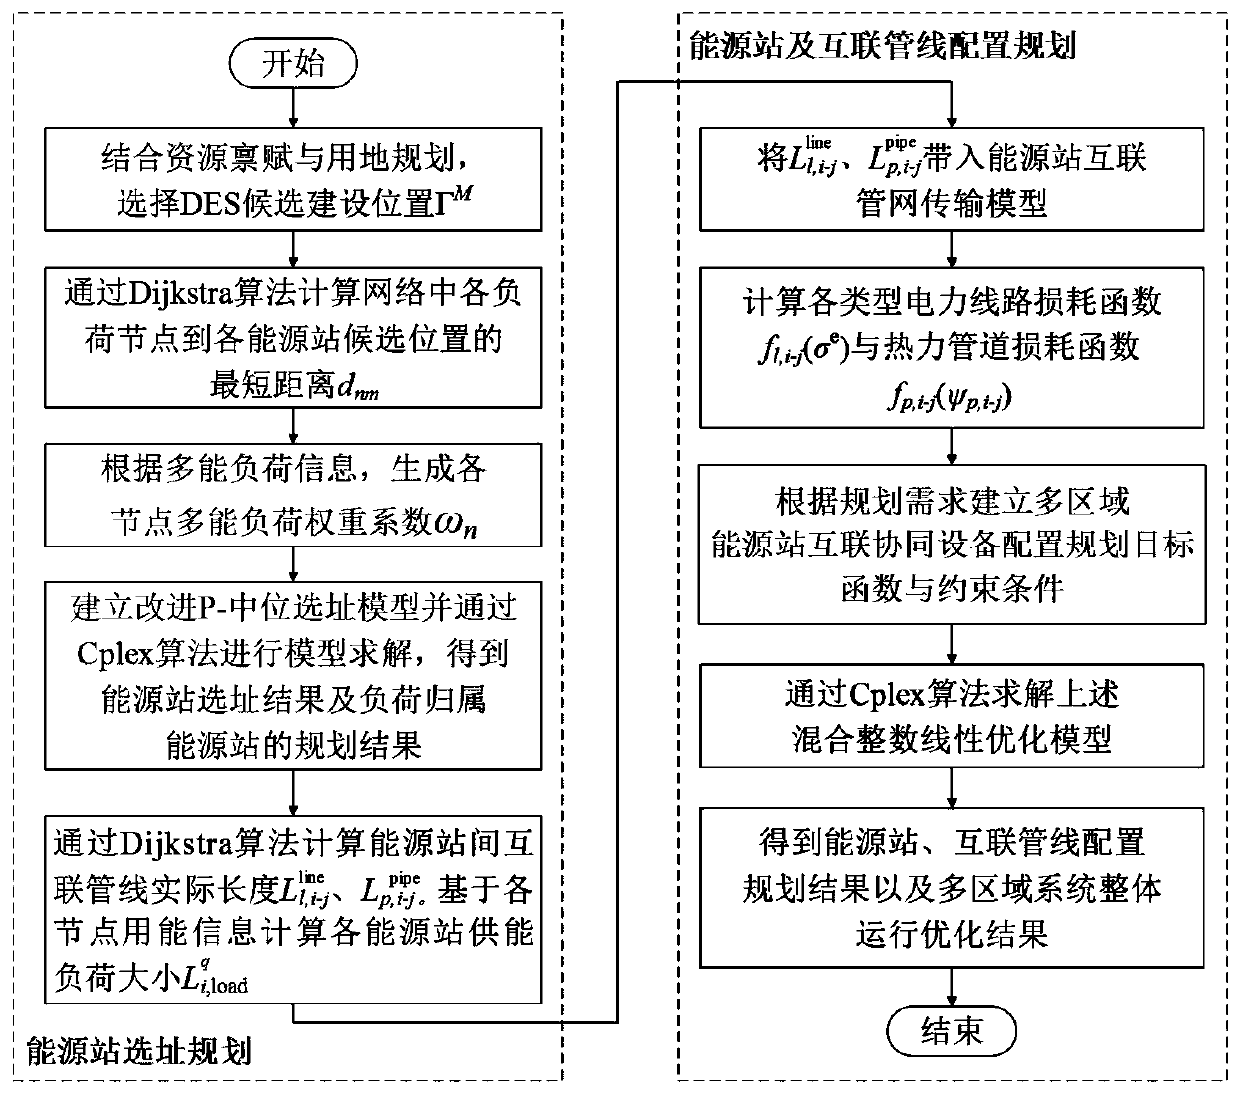 Energy station equipment configuration and pipeline planning method considering multi-region interconnection coordination